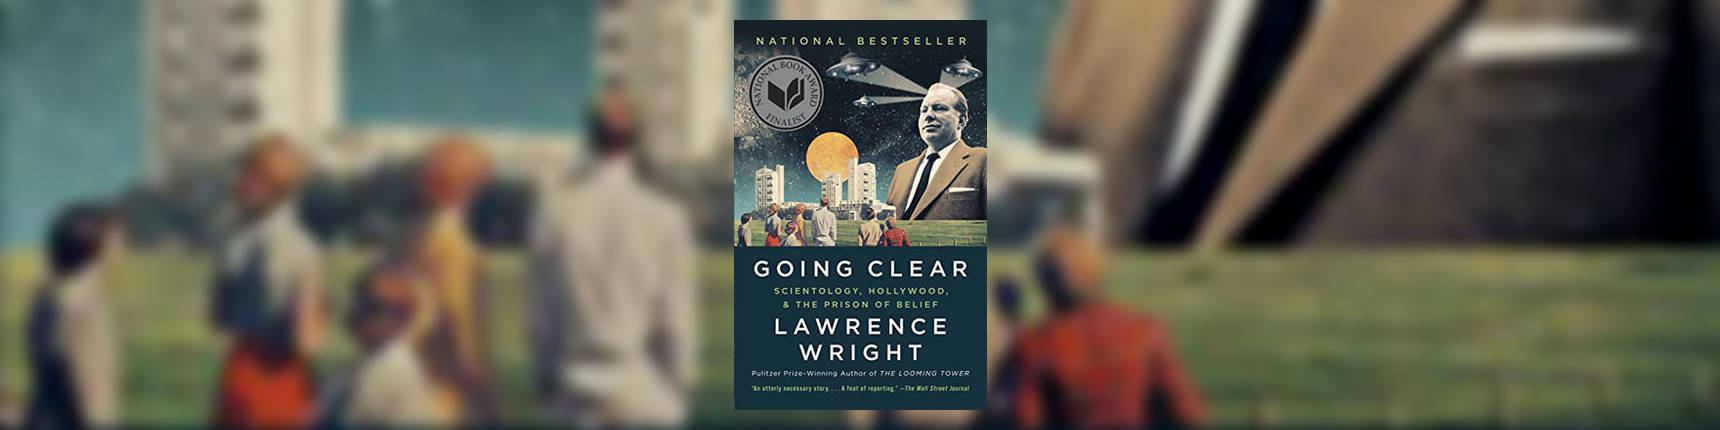 Going clear cover